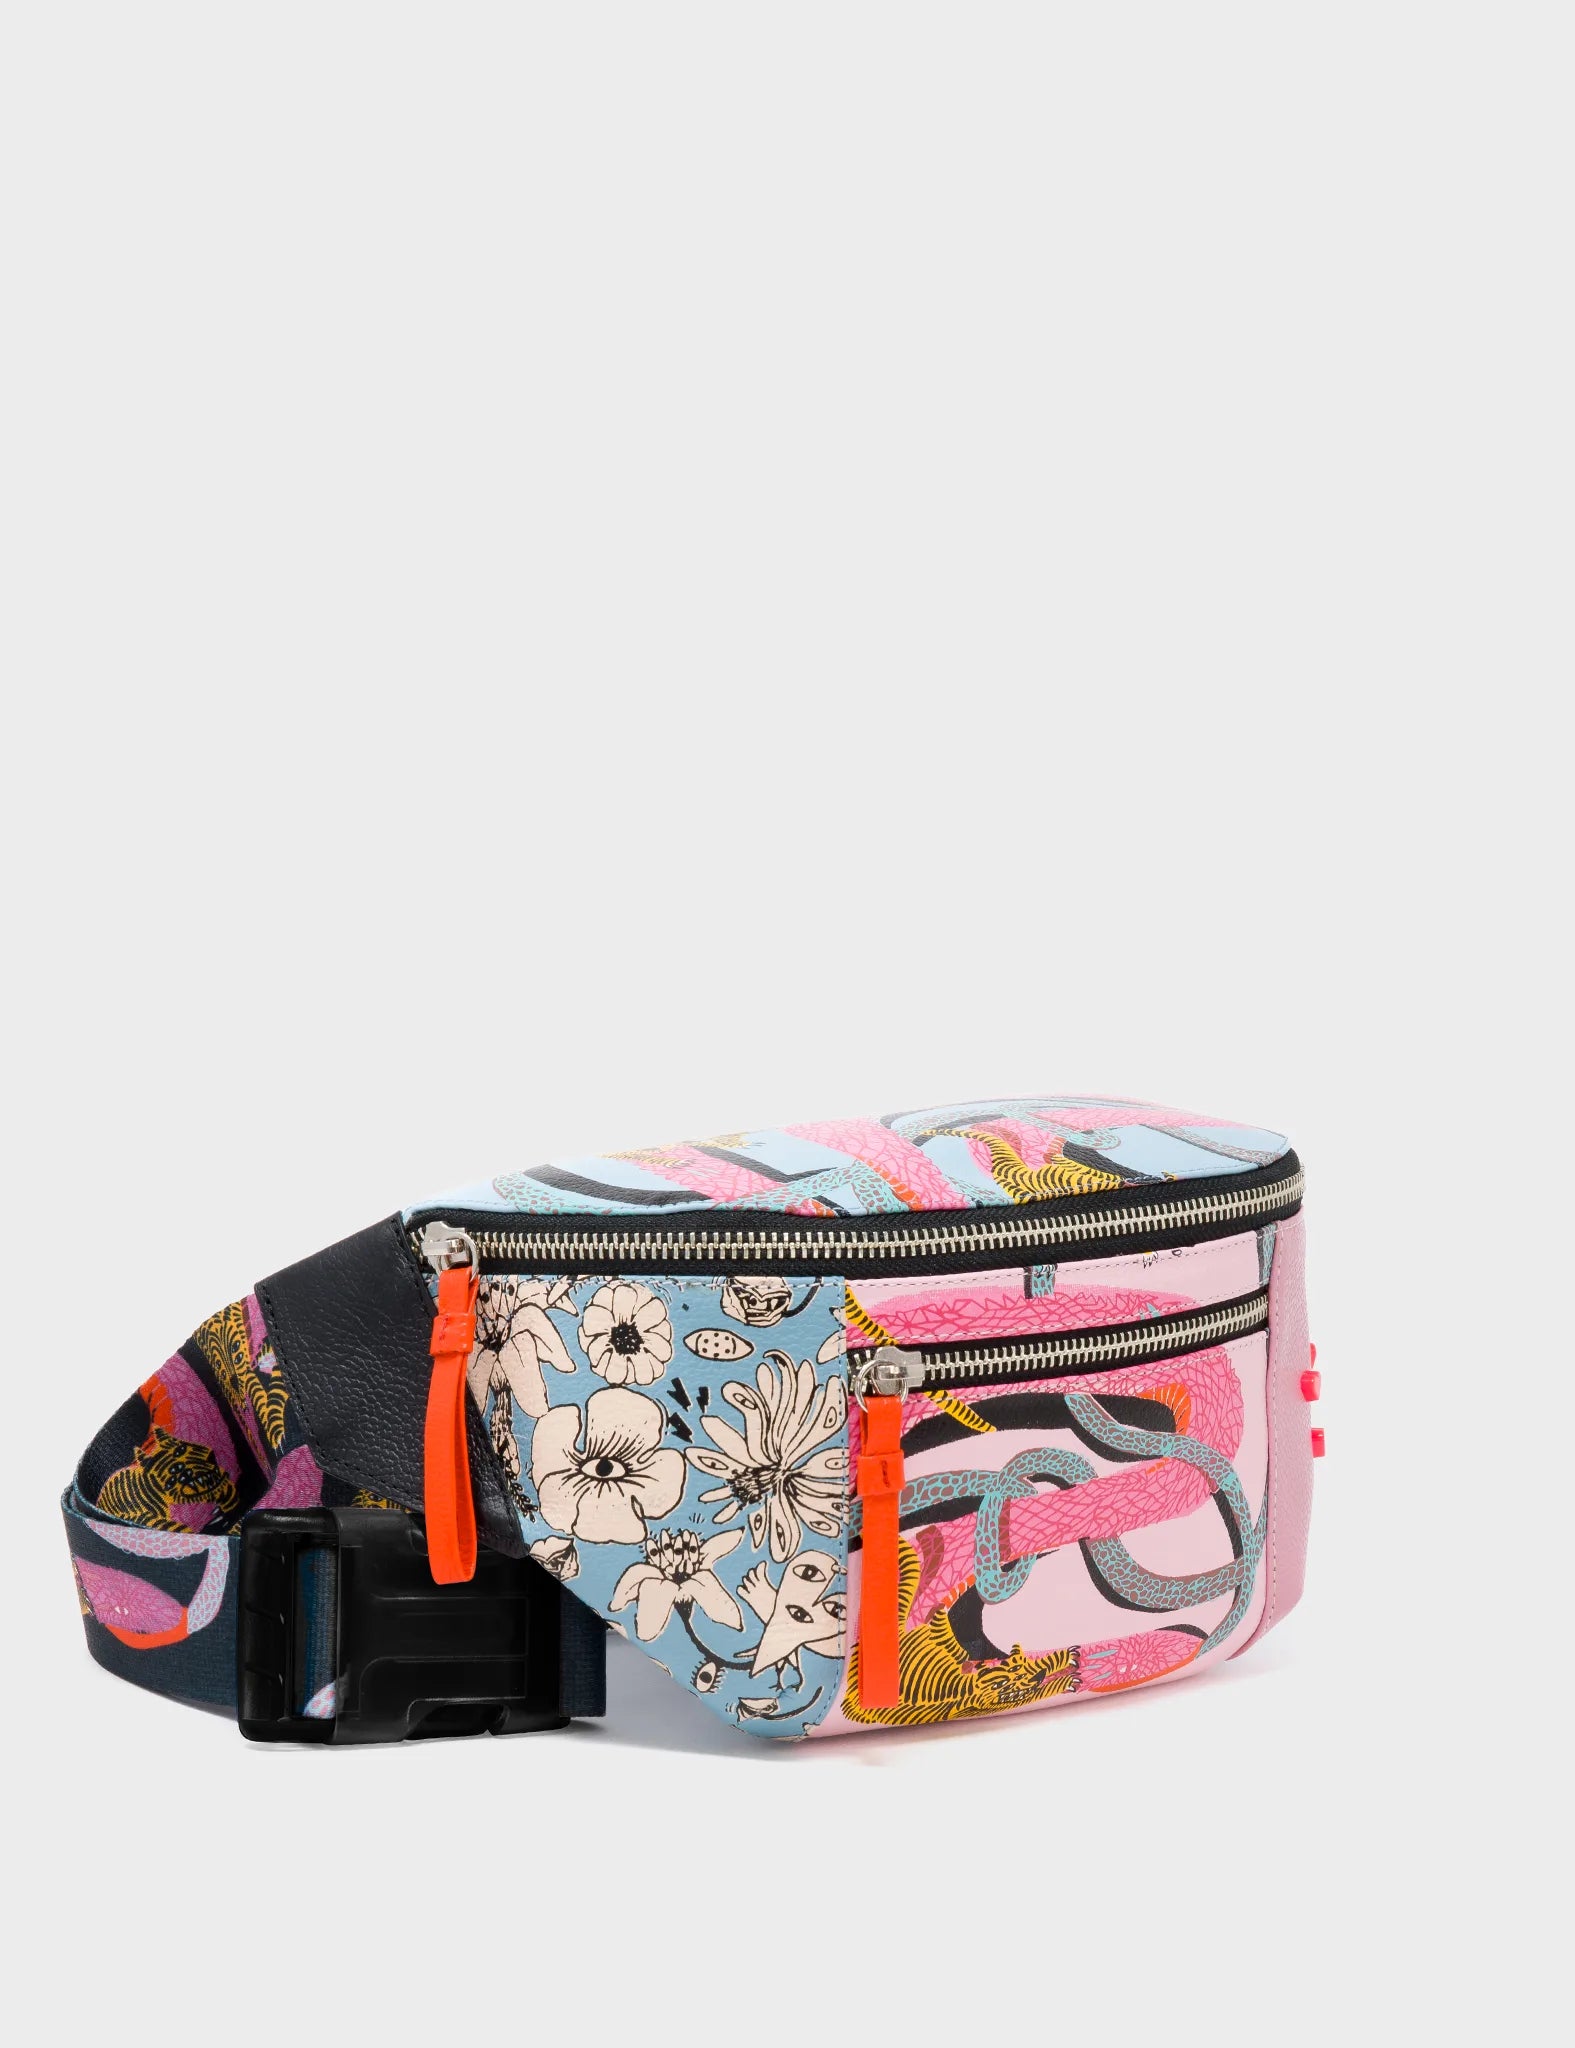 Fanny Pack Pink And Blue Leather - Tangled Tiger & Snake Print